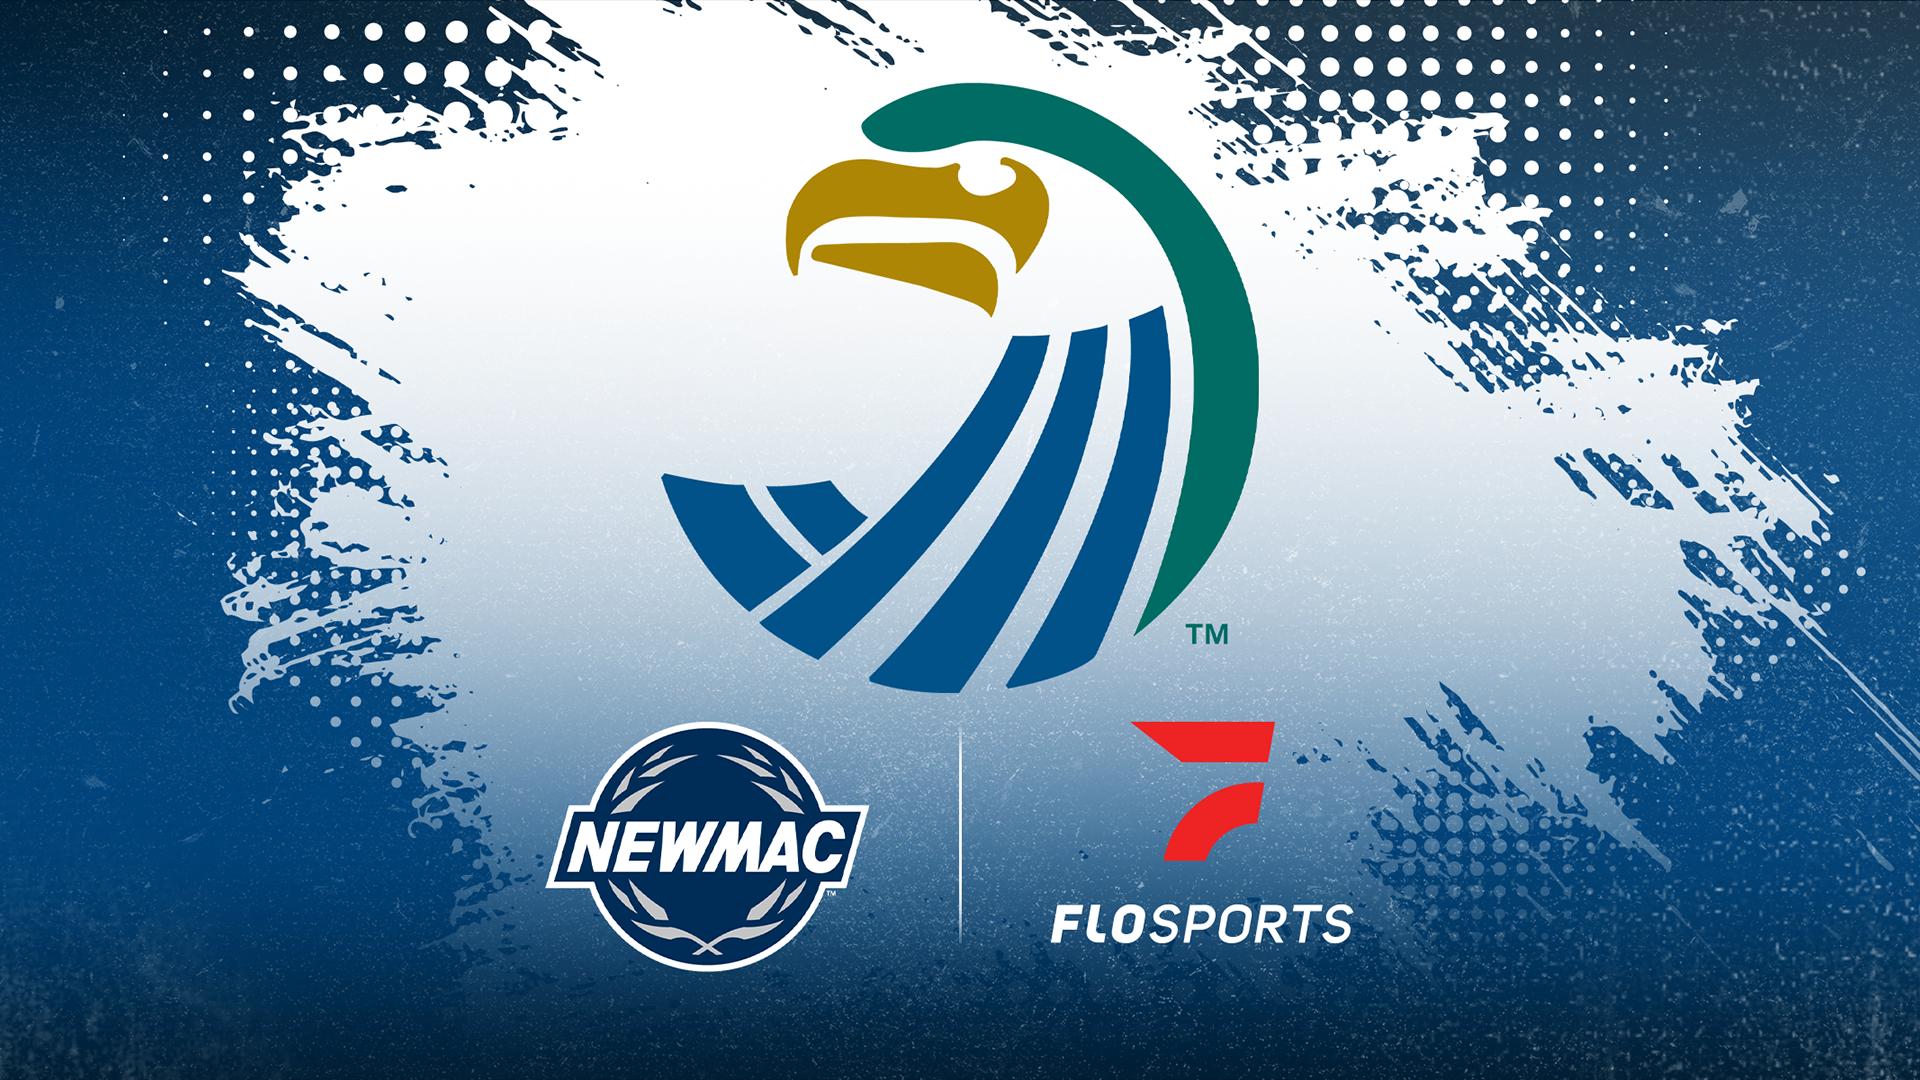 The NEWMAC Announces FloSports as Exclusive Media Partner